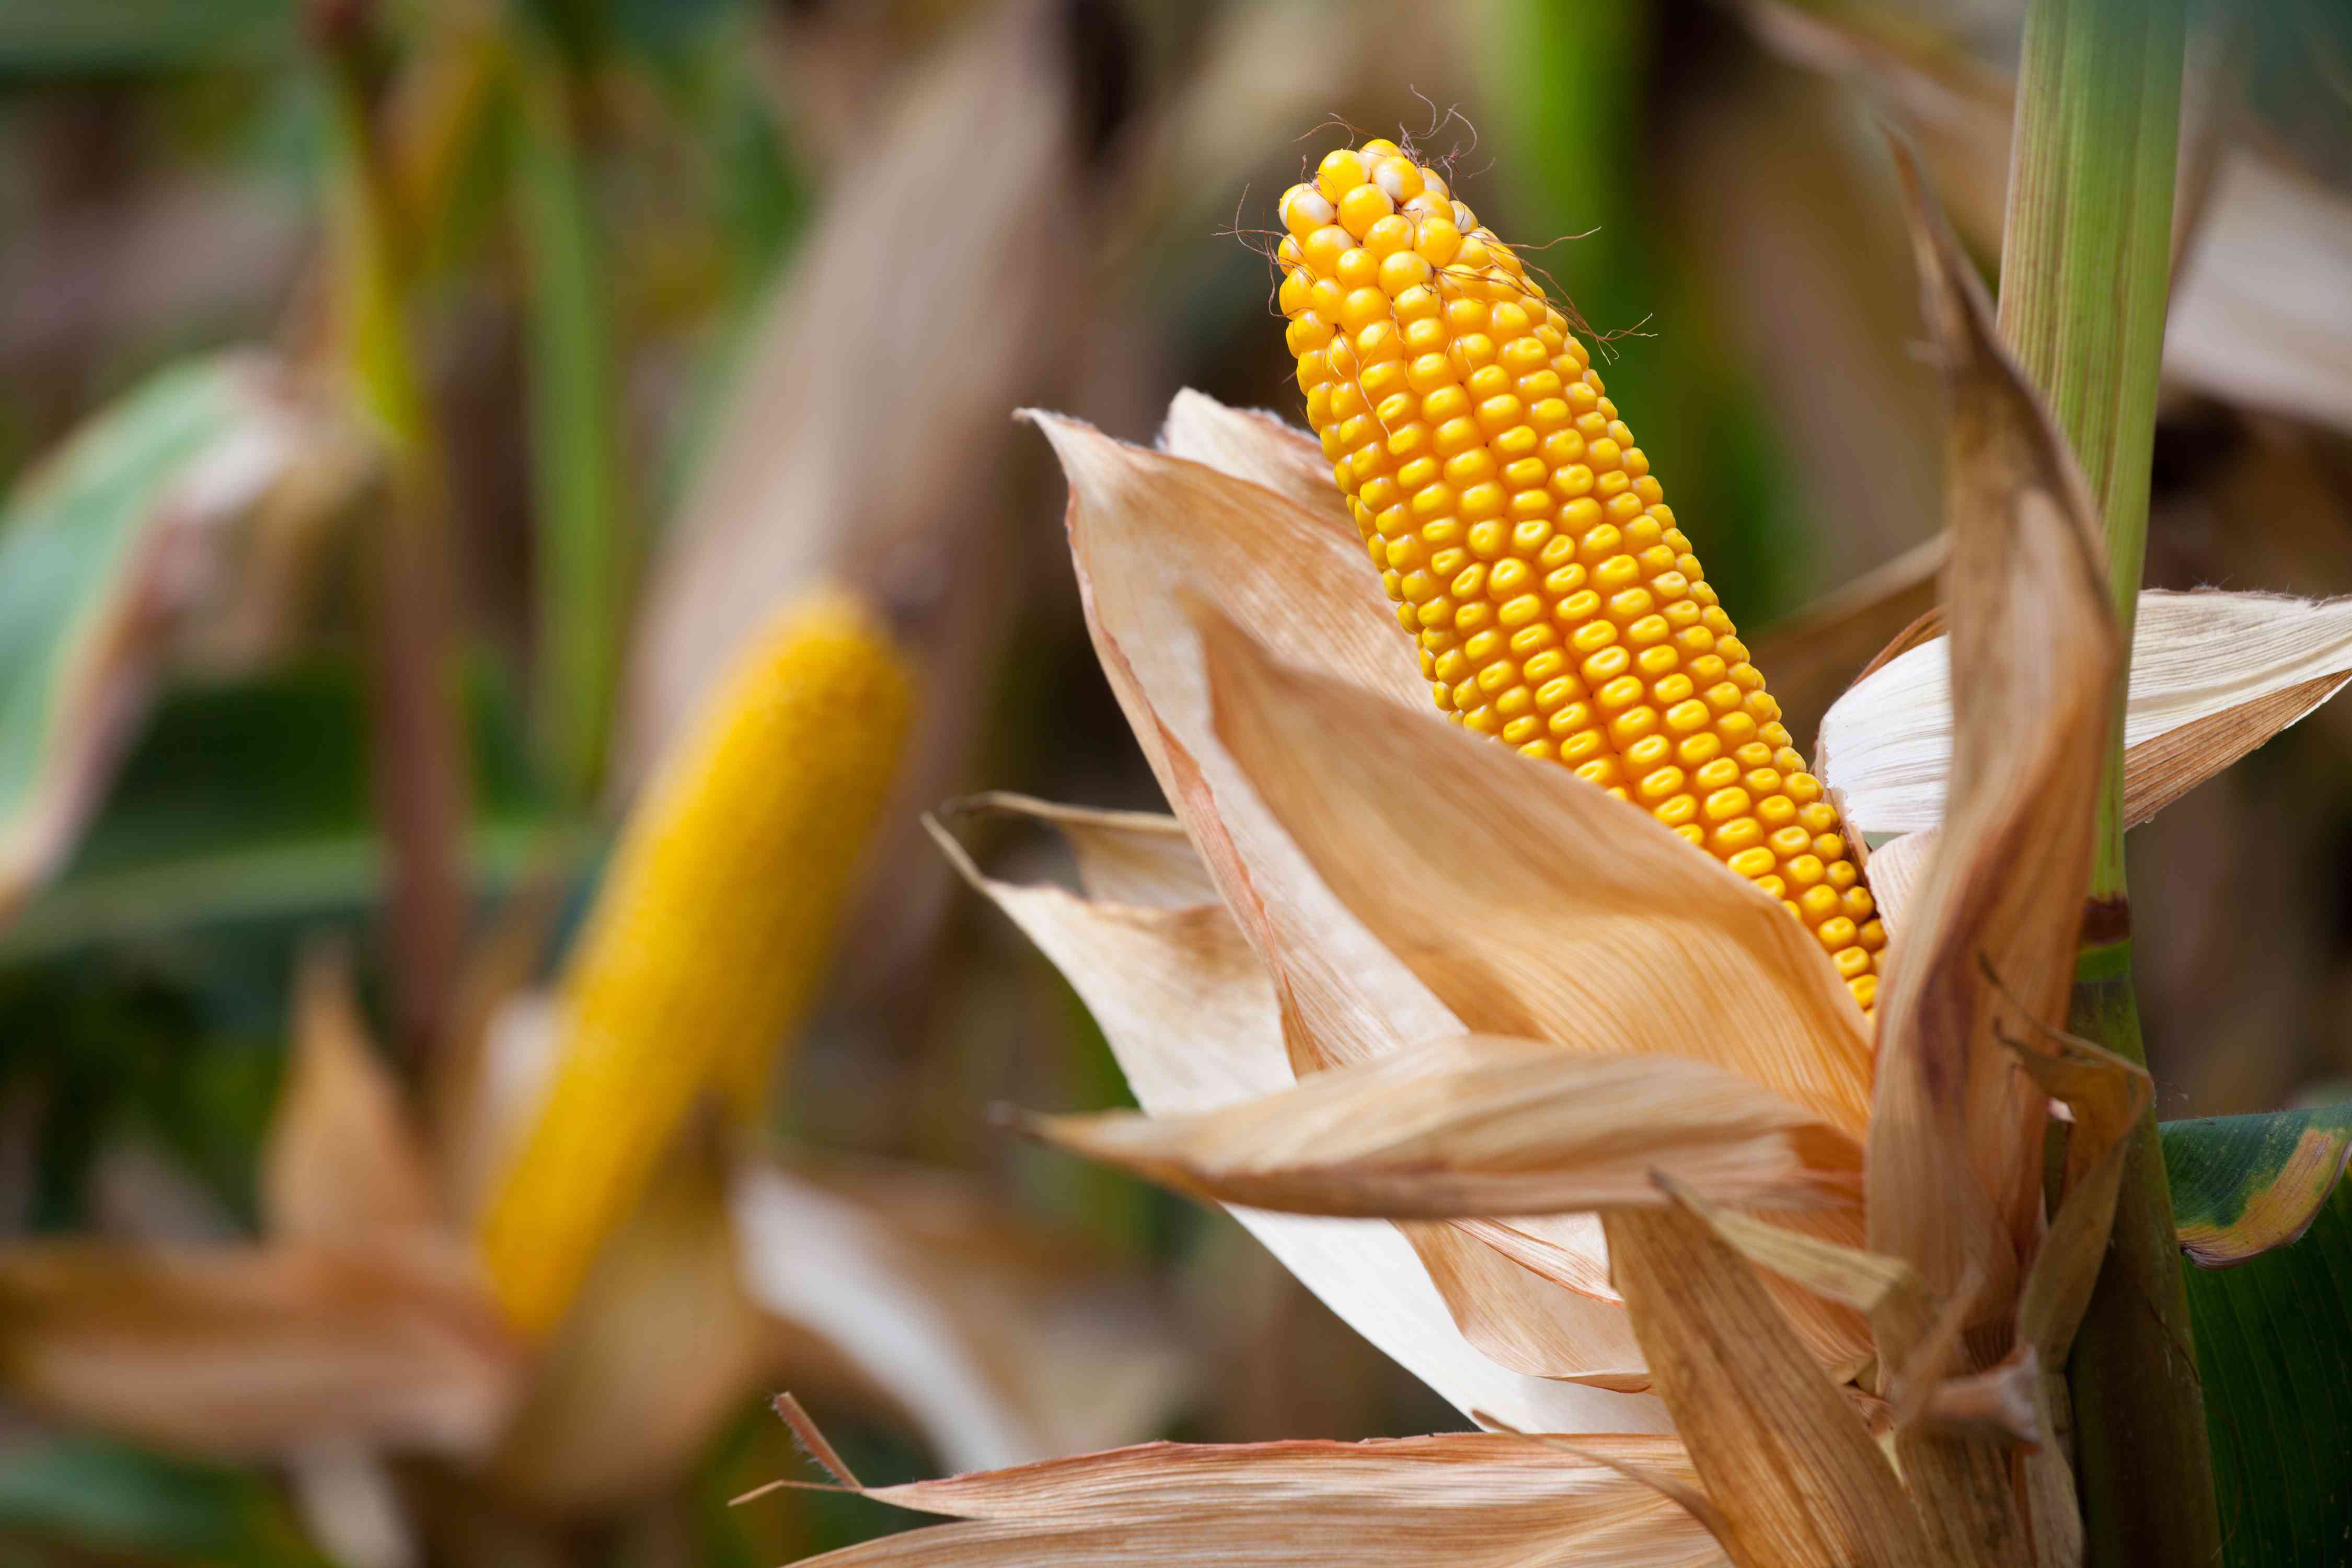 A corn cob on the plant with the dead husk peeled back showing the healthy corn cob.